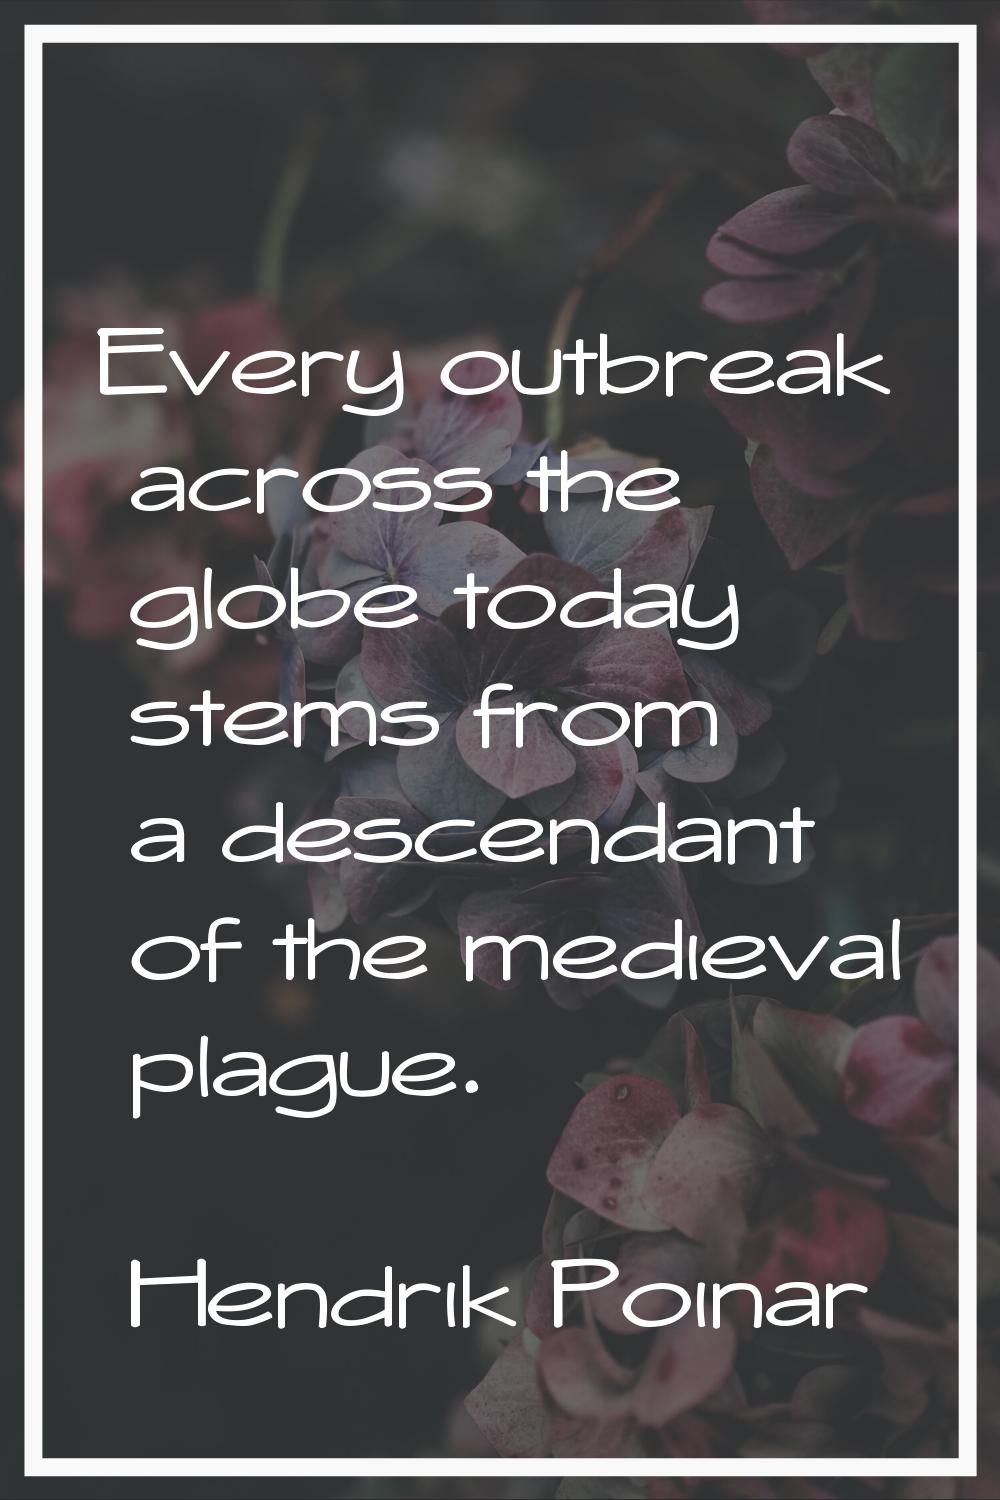 Every outbreak across the globe today stems from a descendant of the medieval plague.